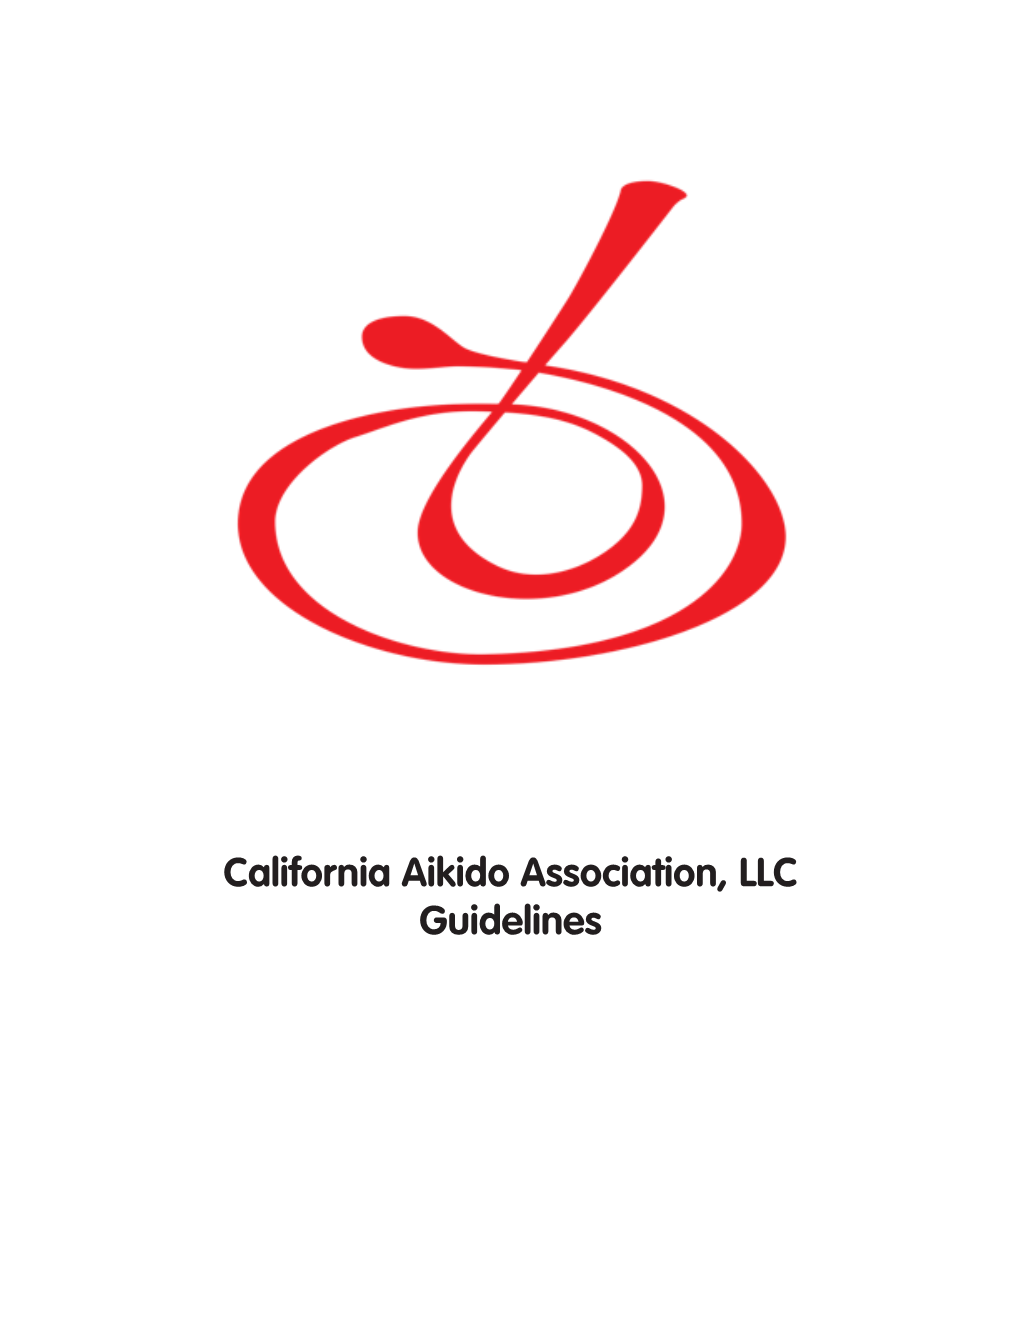 CAA Guidelines, and All Content on the Website